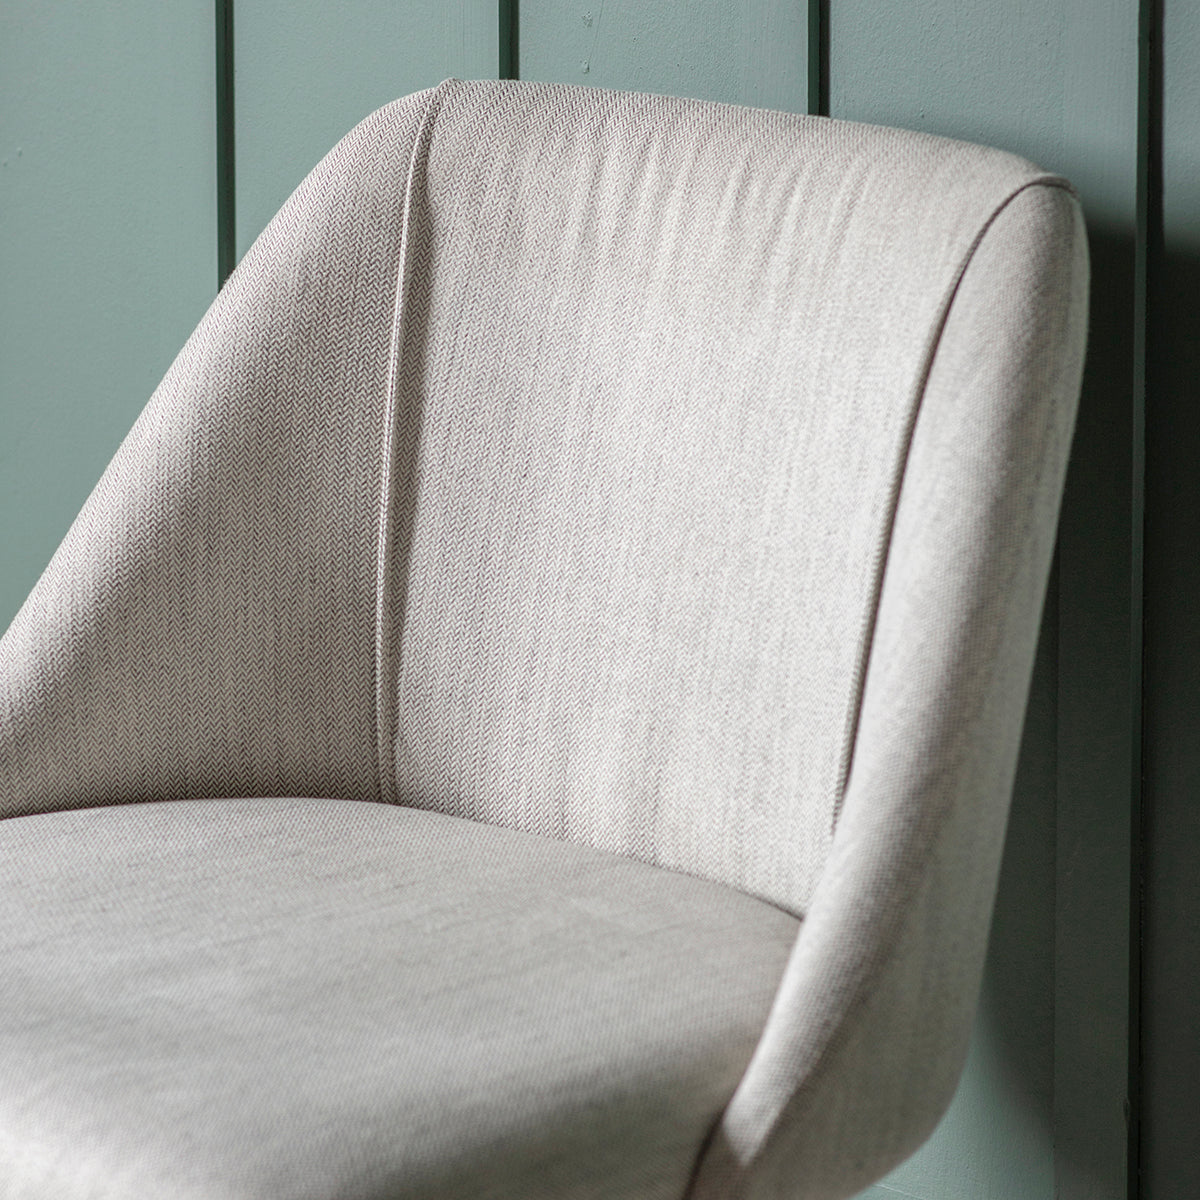 A neutral Hempston dining chair duo by Kikiathome.co.uk adds interior decor flair to any home.